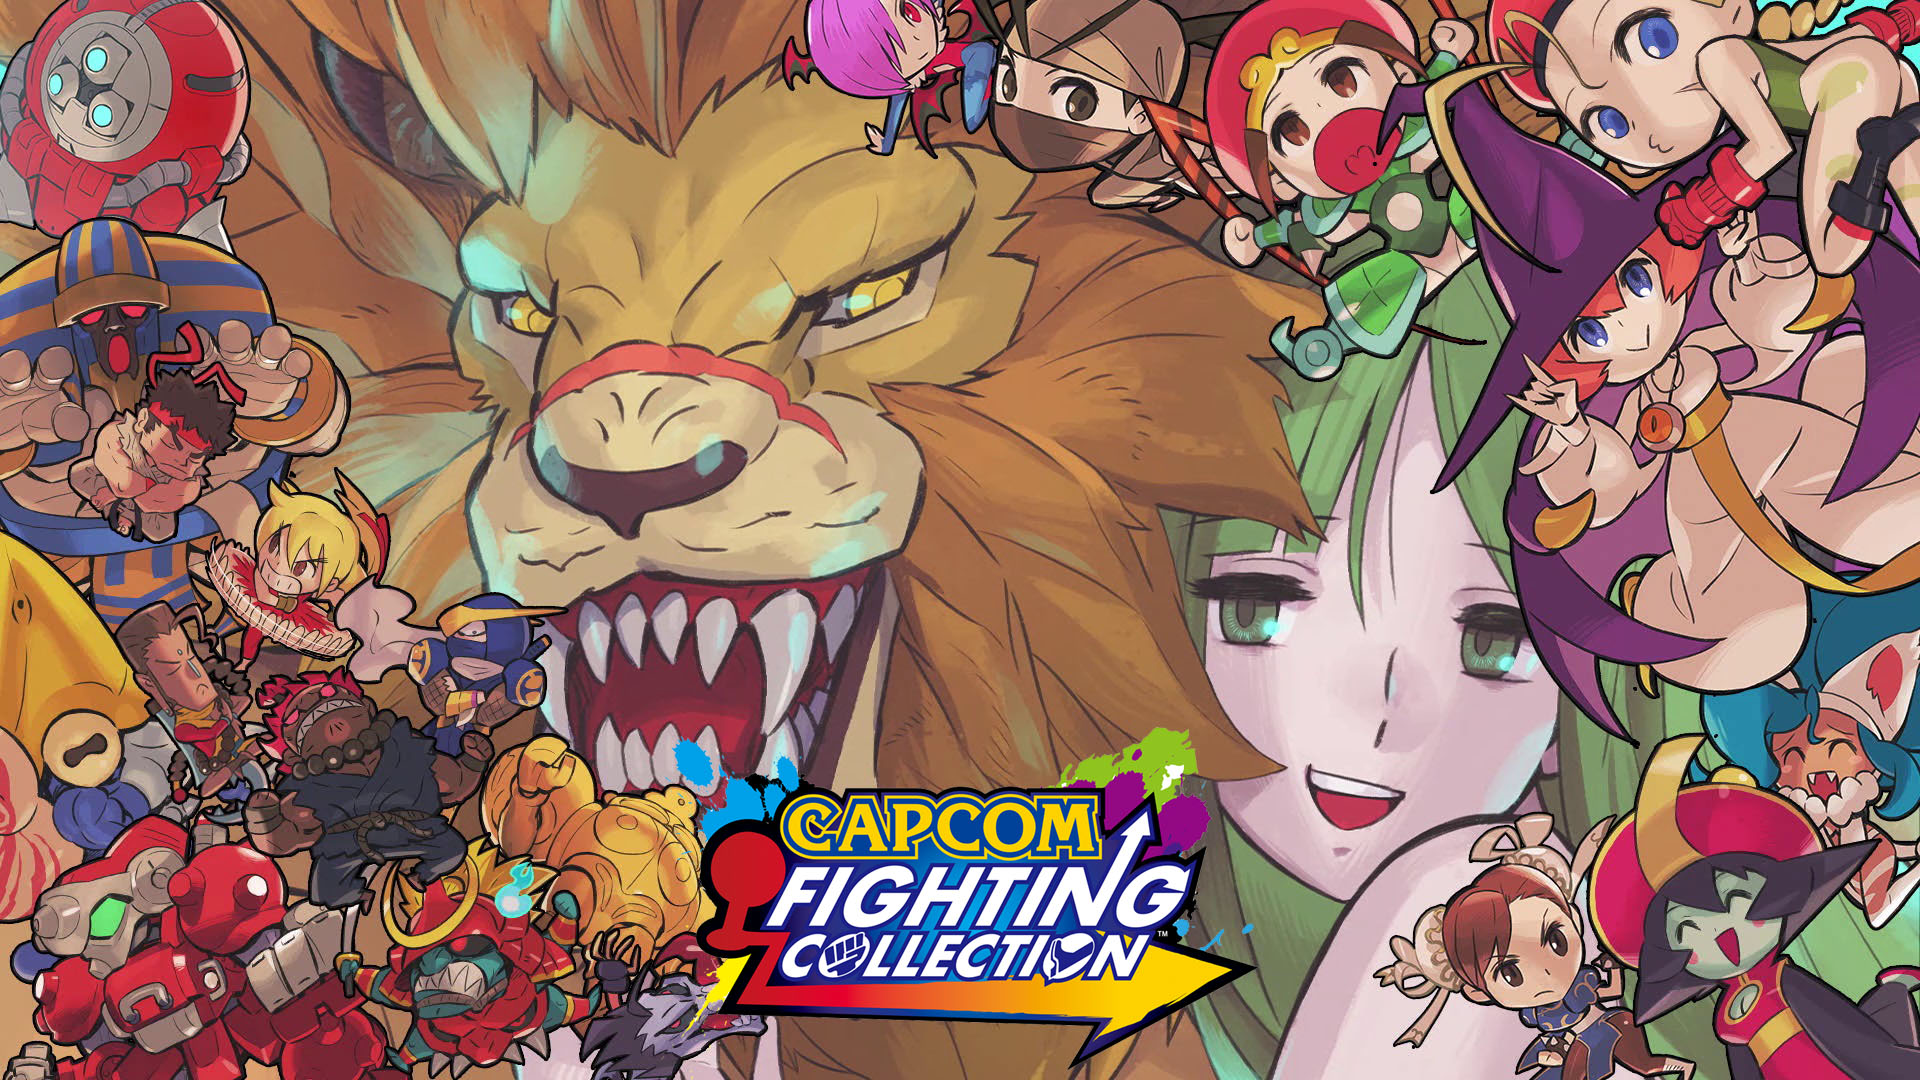 Capcom Fighting Collection announced